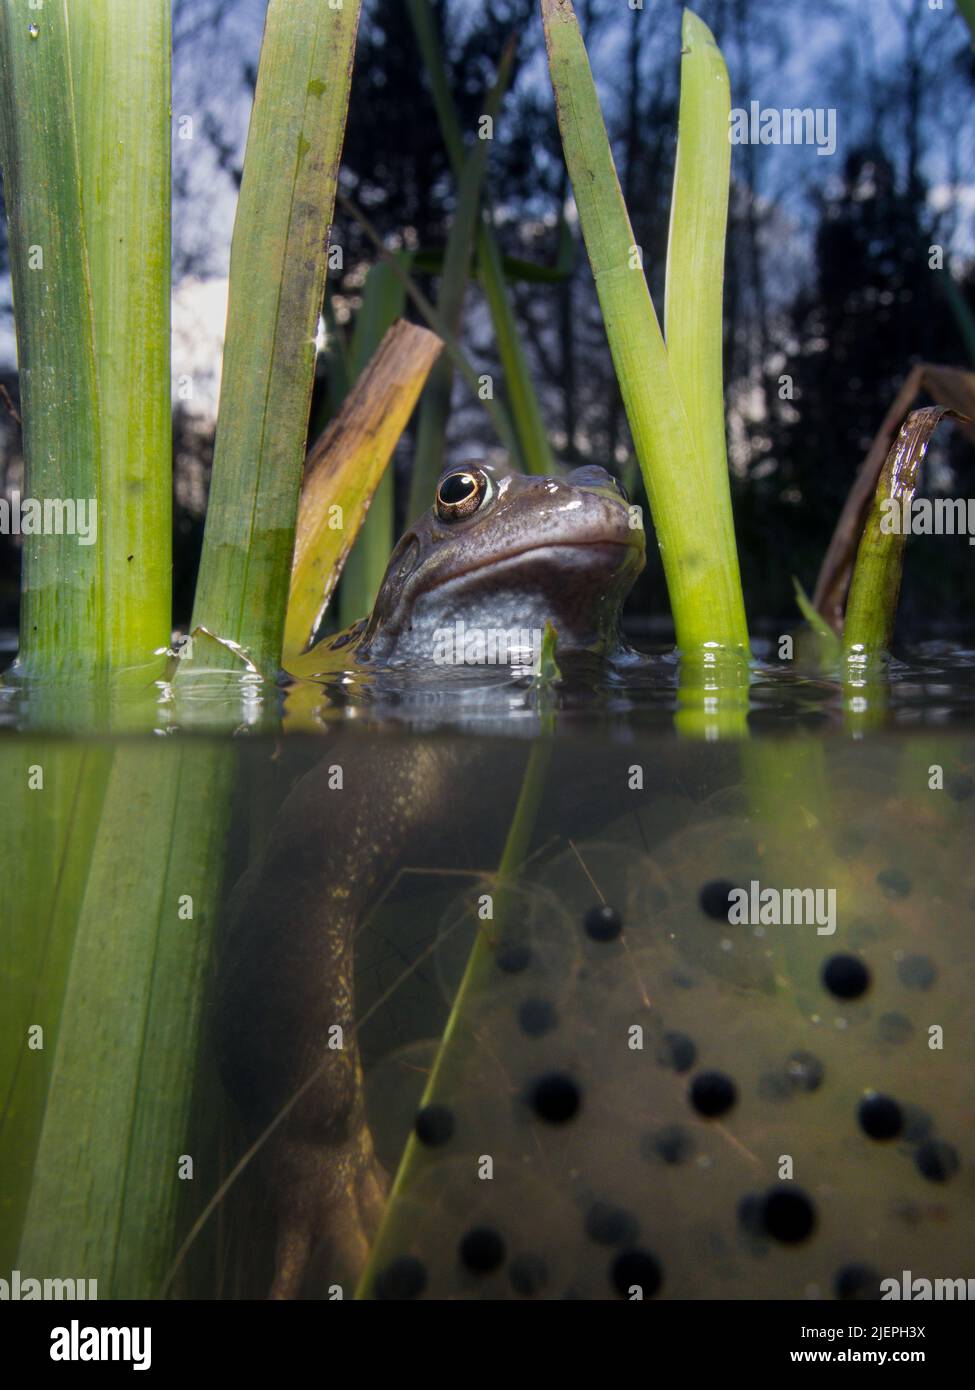 A common frog - rena temporaria - among frog spawn and reeds. Above and below the water is visible. Glasgow, Scotland Stock Photo